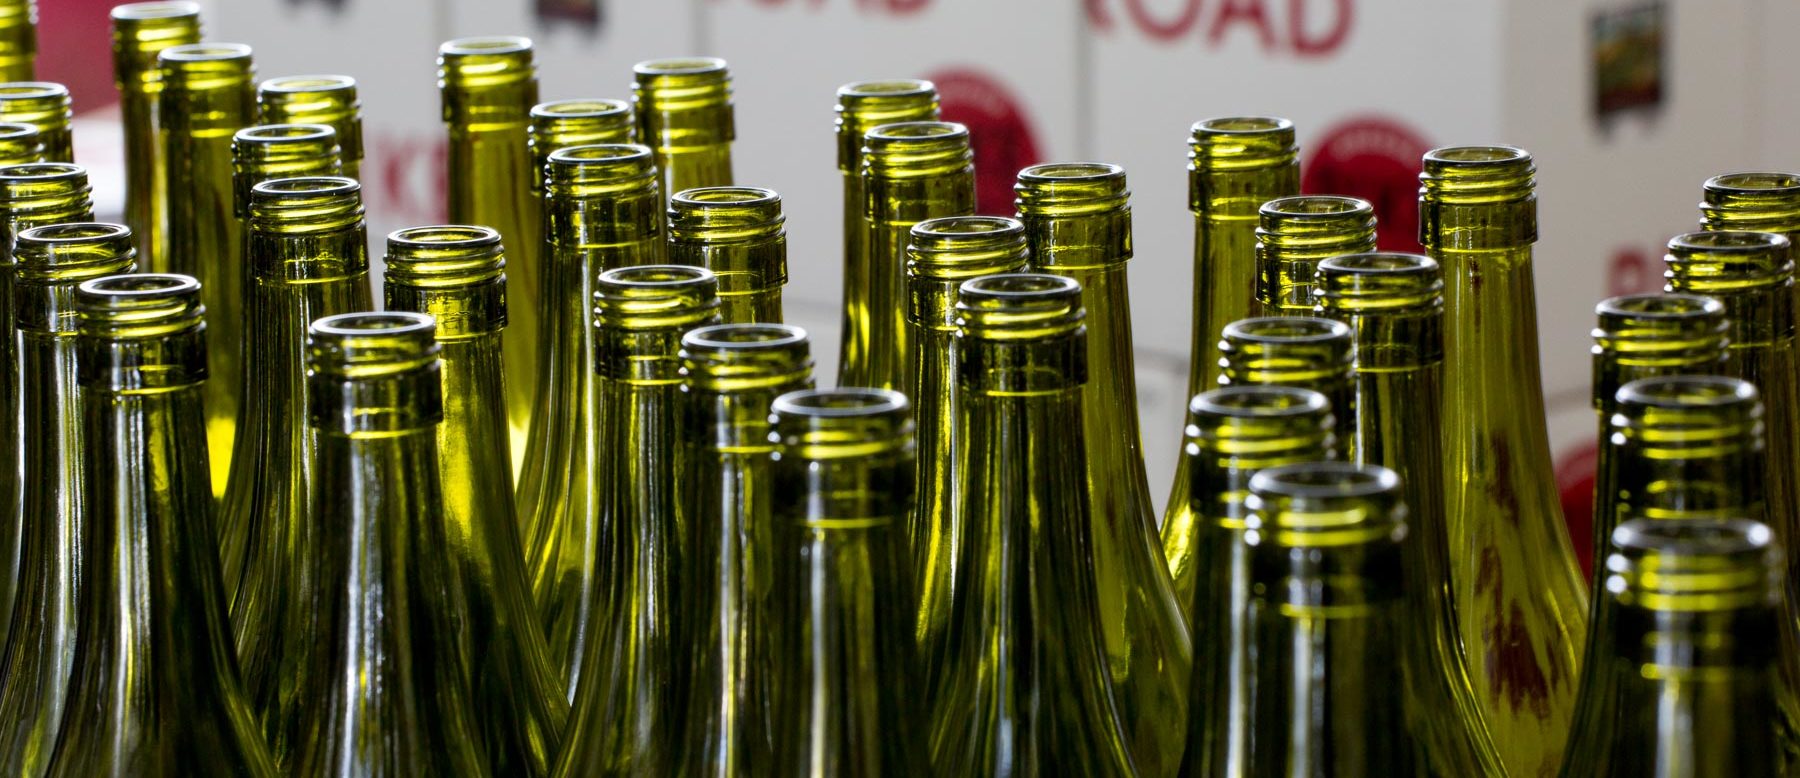 tops of empty wine bottles ready to fill